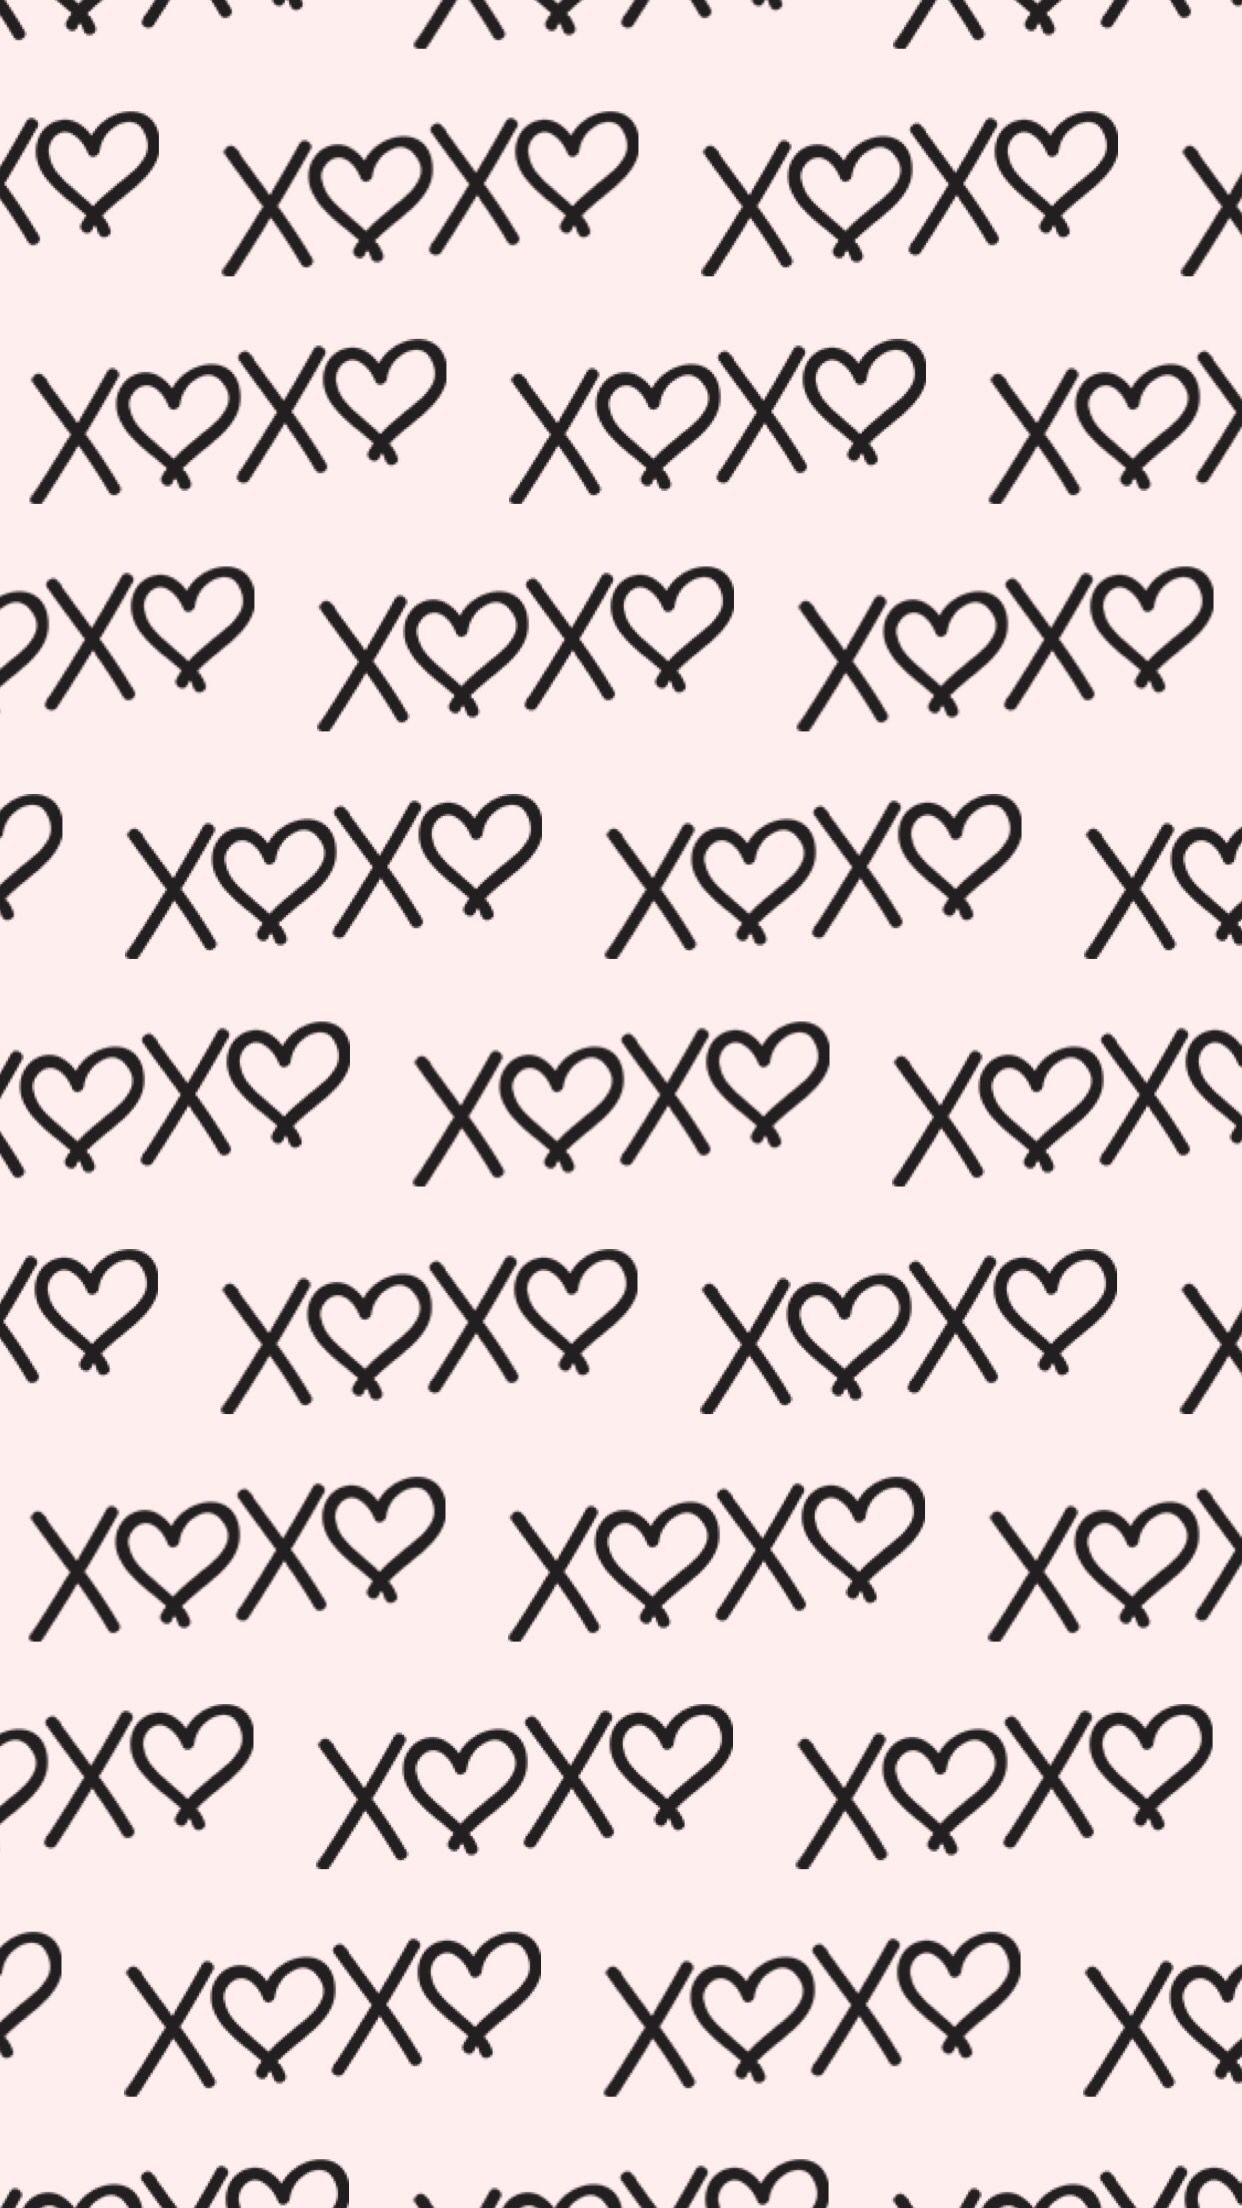 Xoxo Wallpaper Background HD iPhone Android iPad Cute